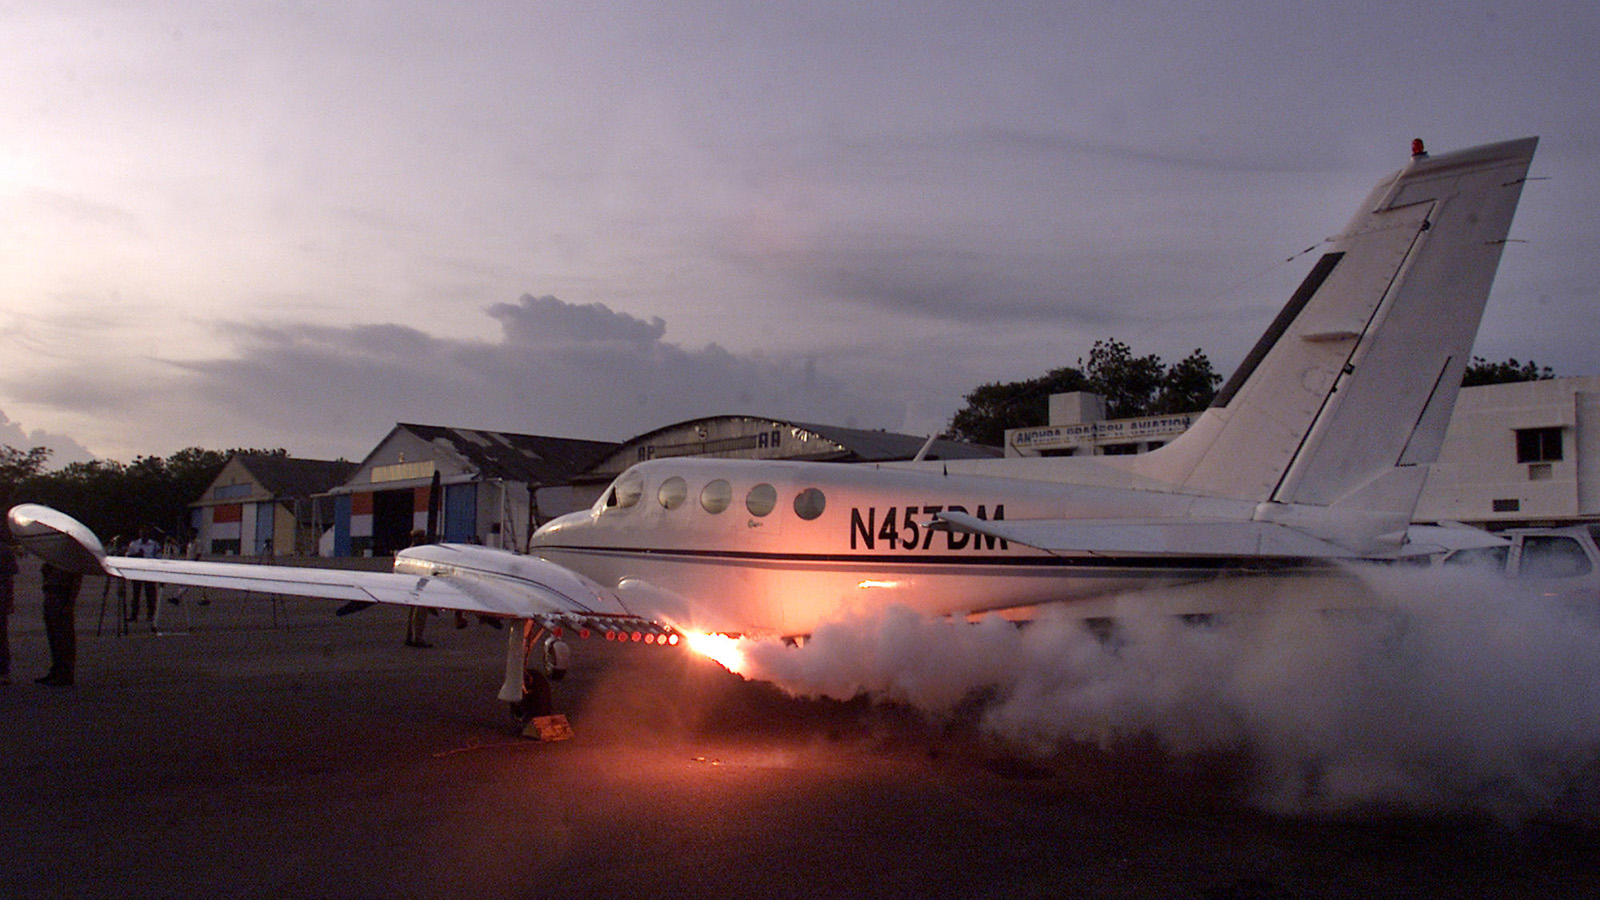 Cloud seeding flares mounted on an aircraft